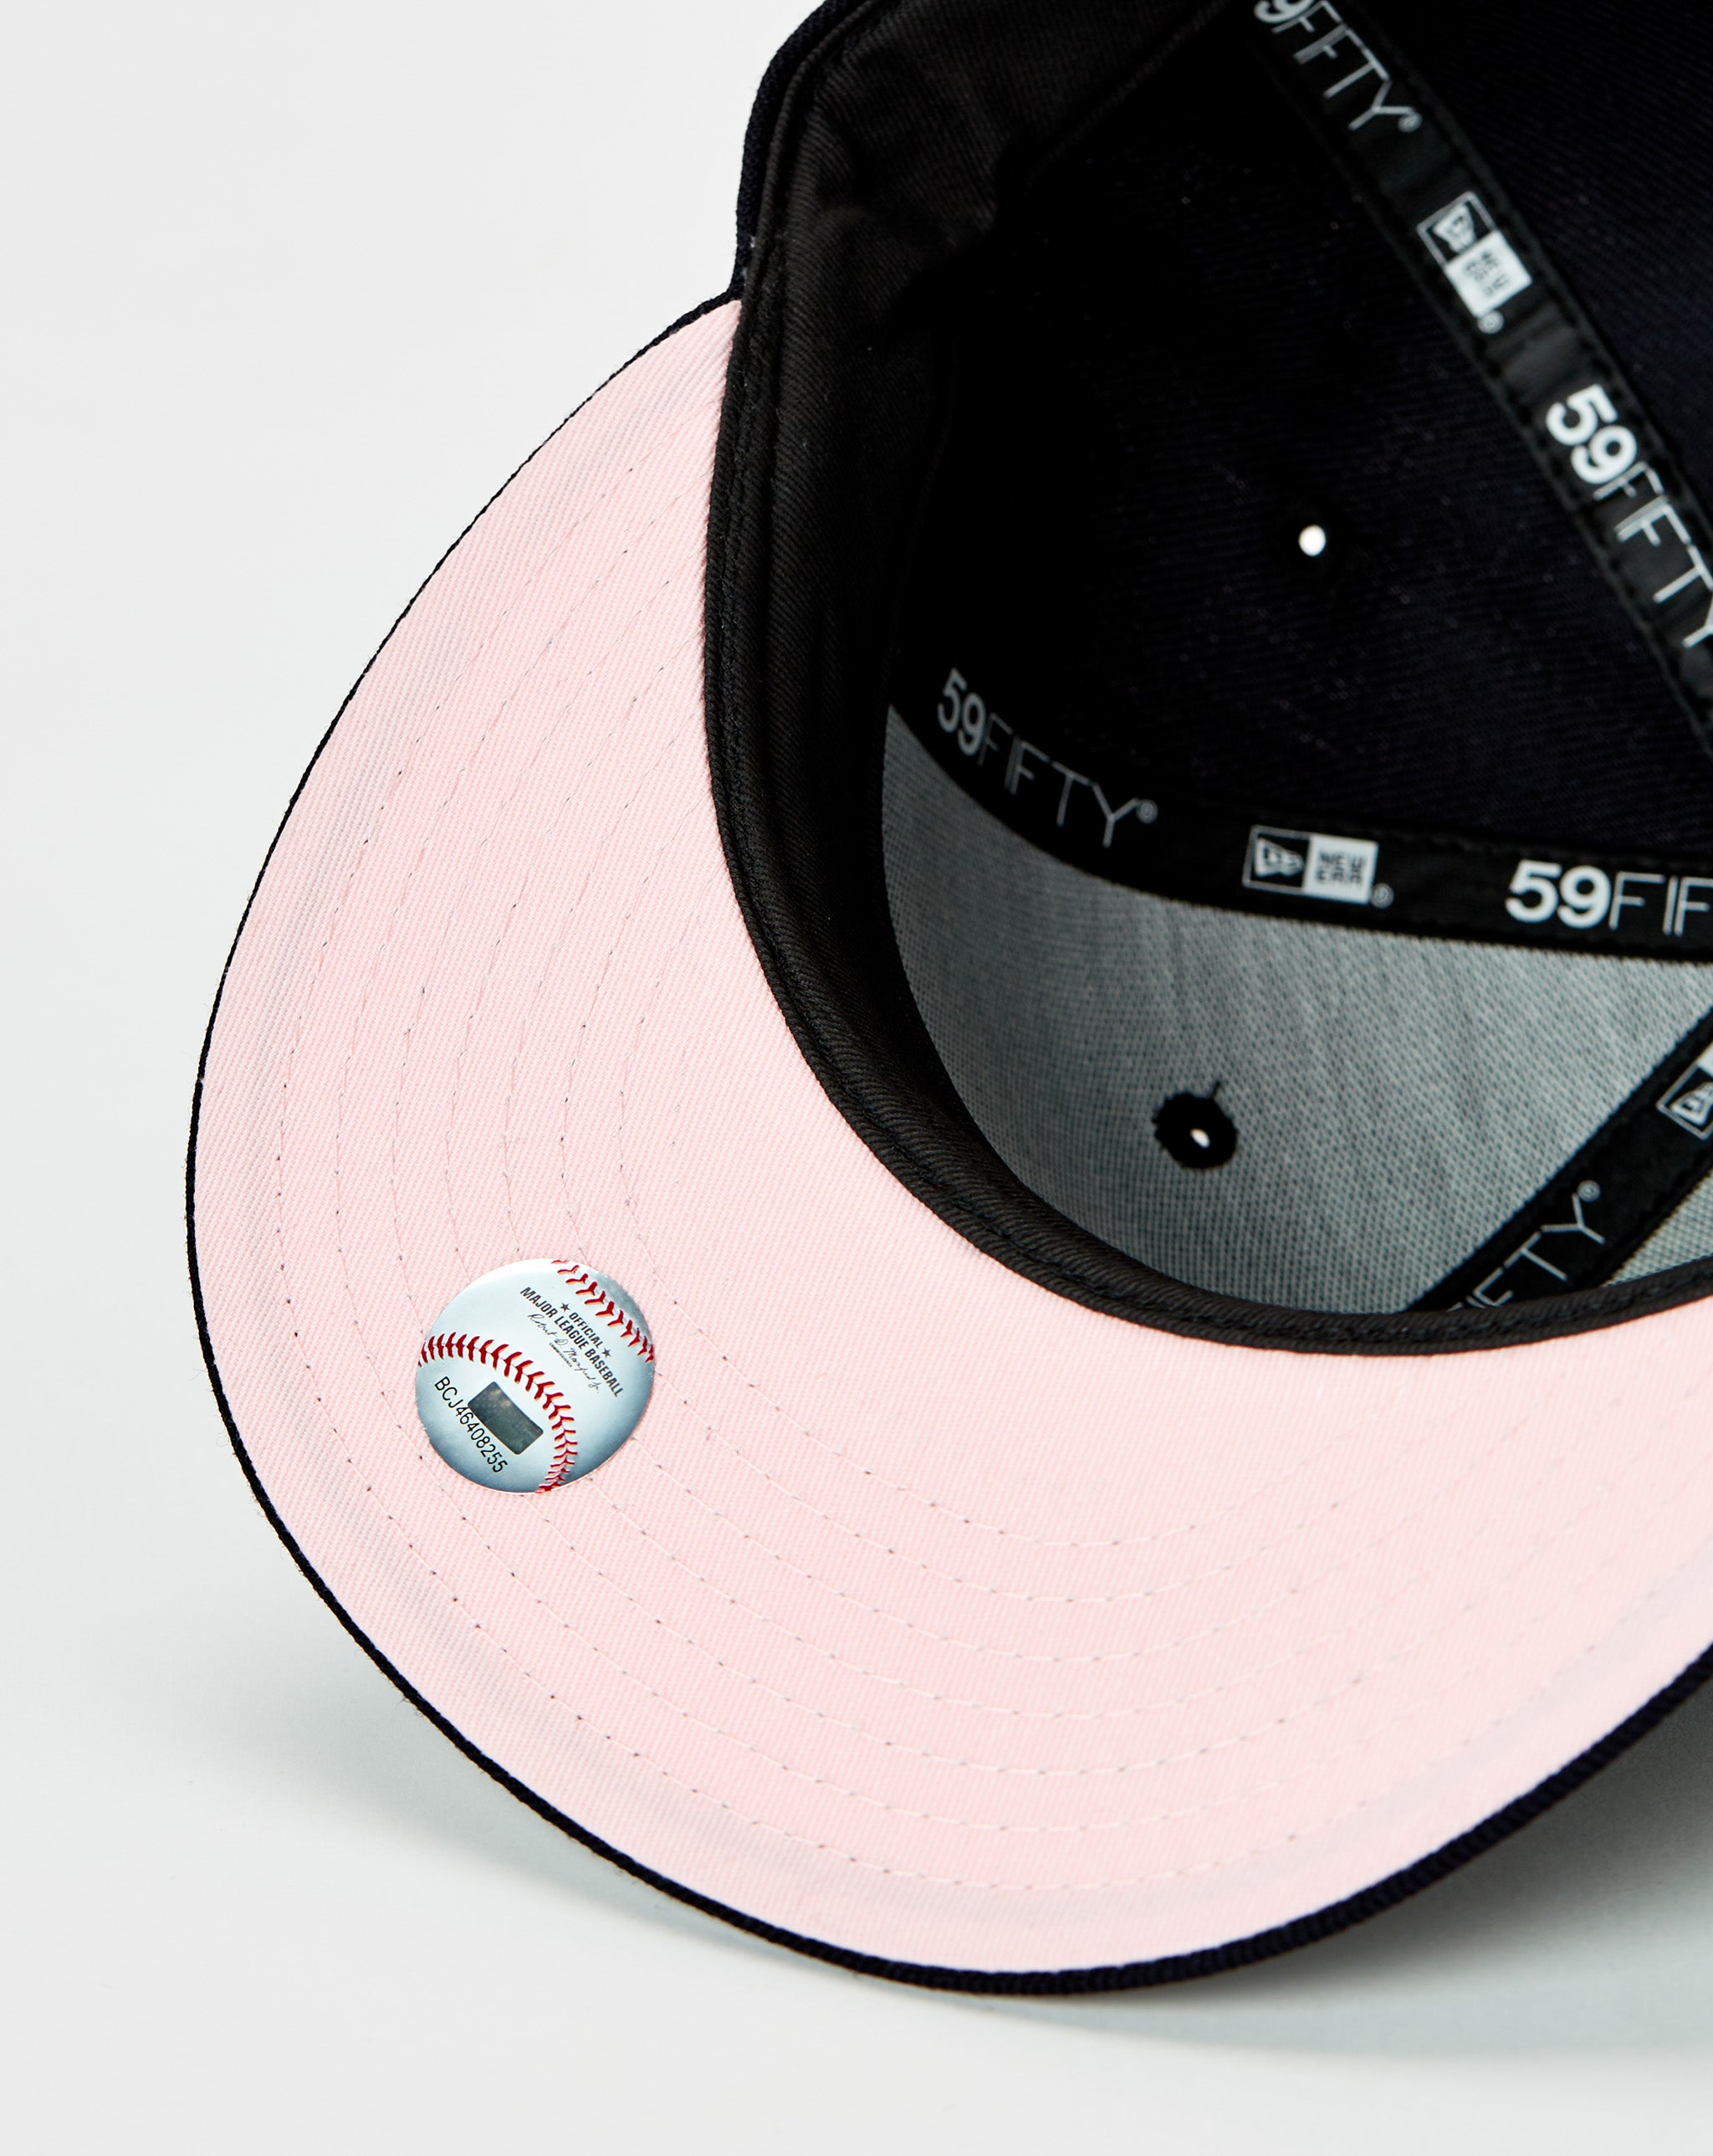 New Era Embroidered logo on the front  - Cheap Urlfreeze Jordan outlet